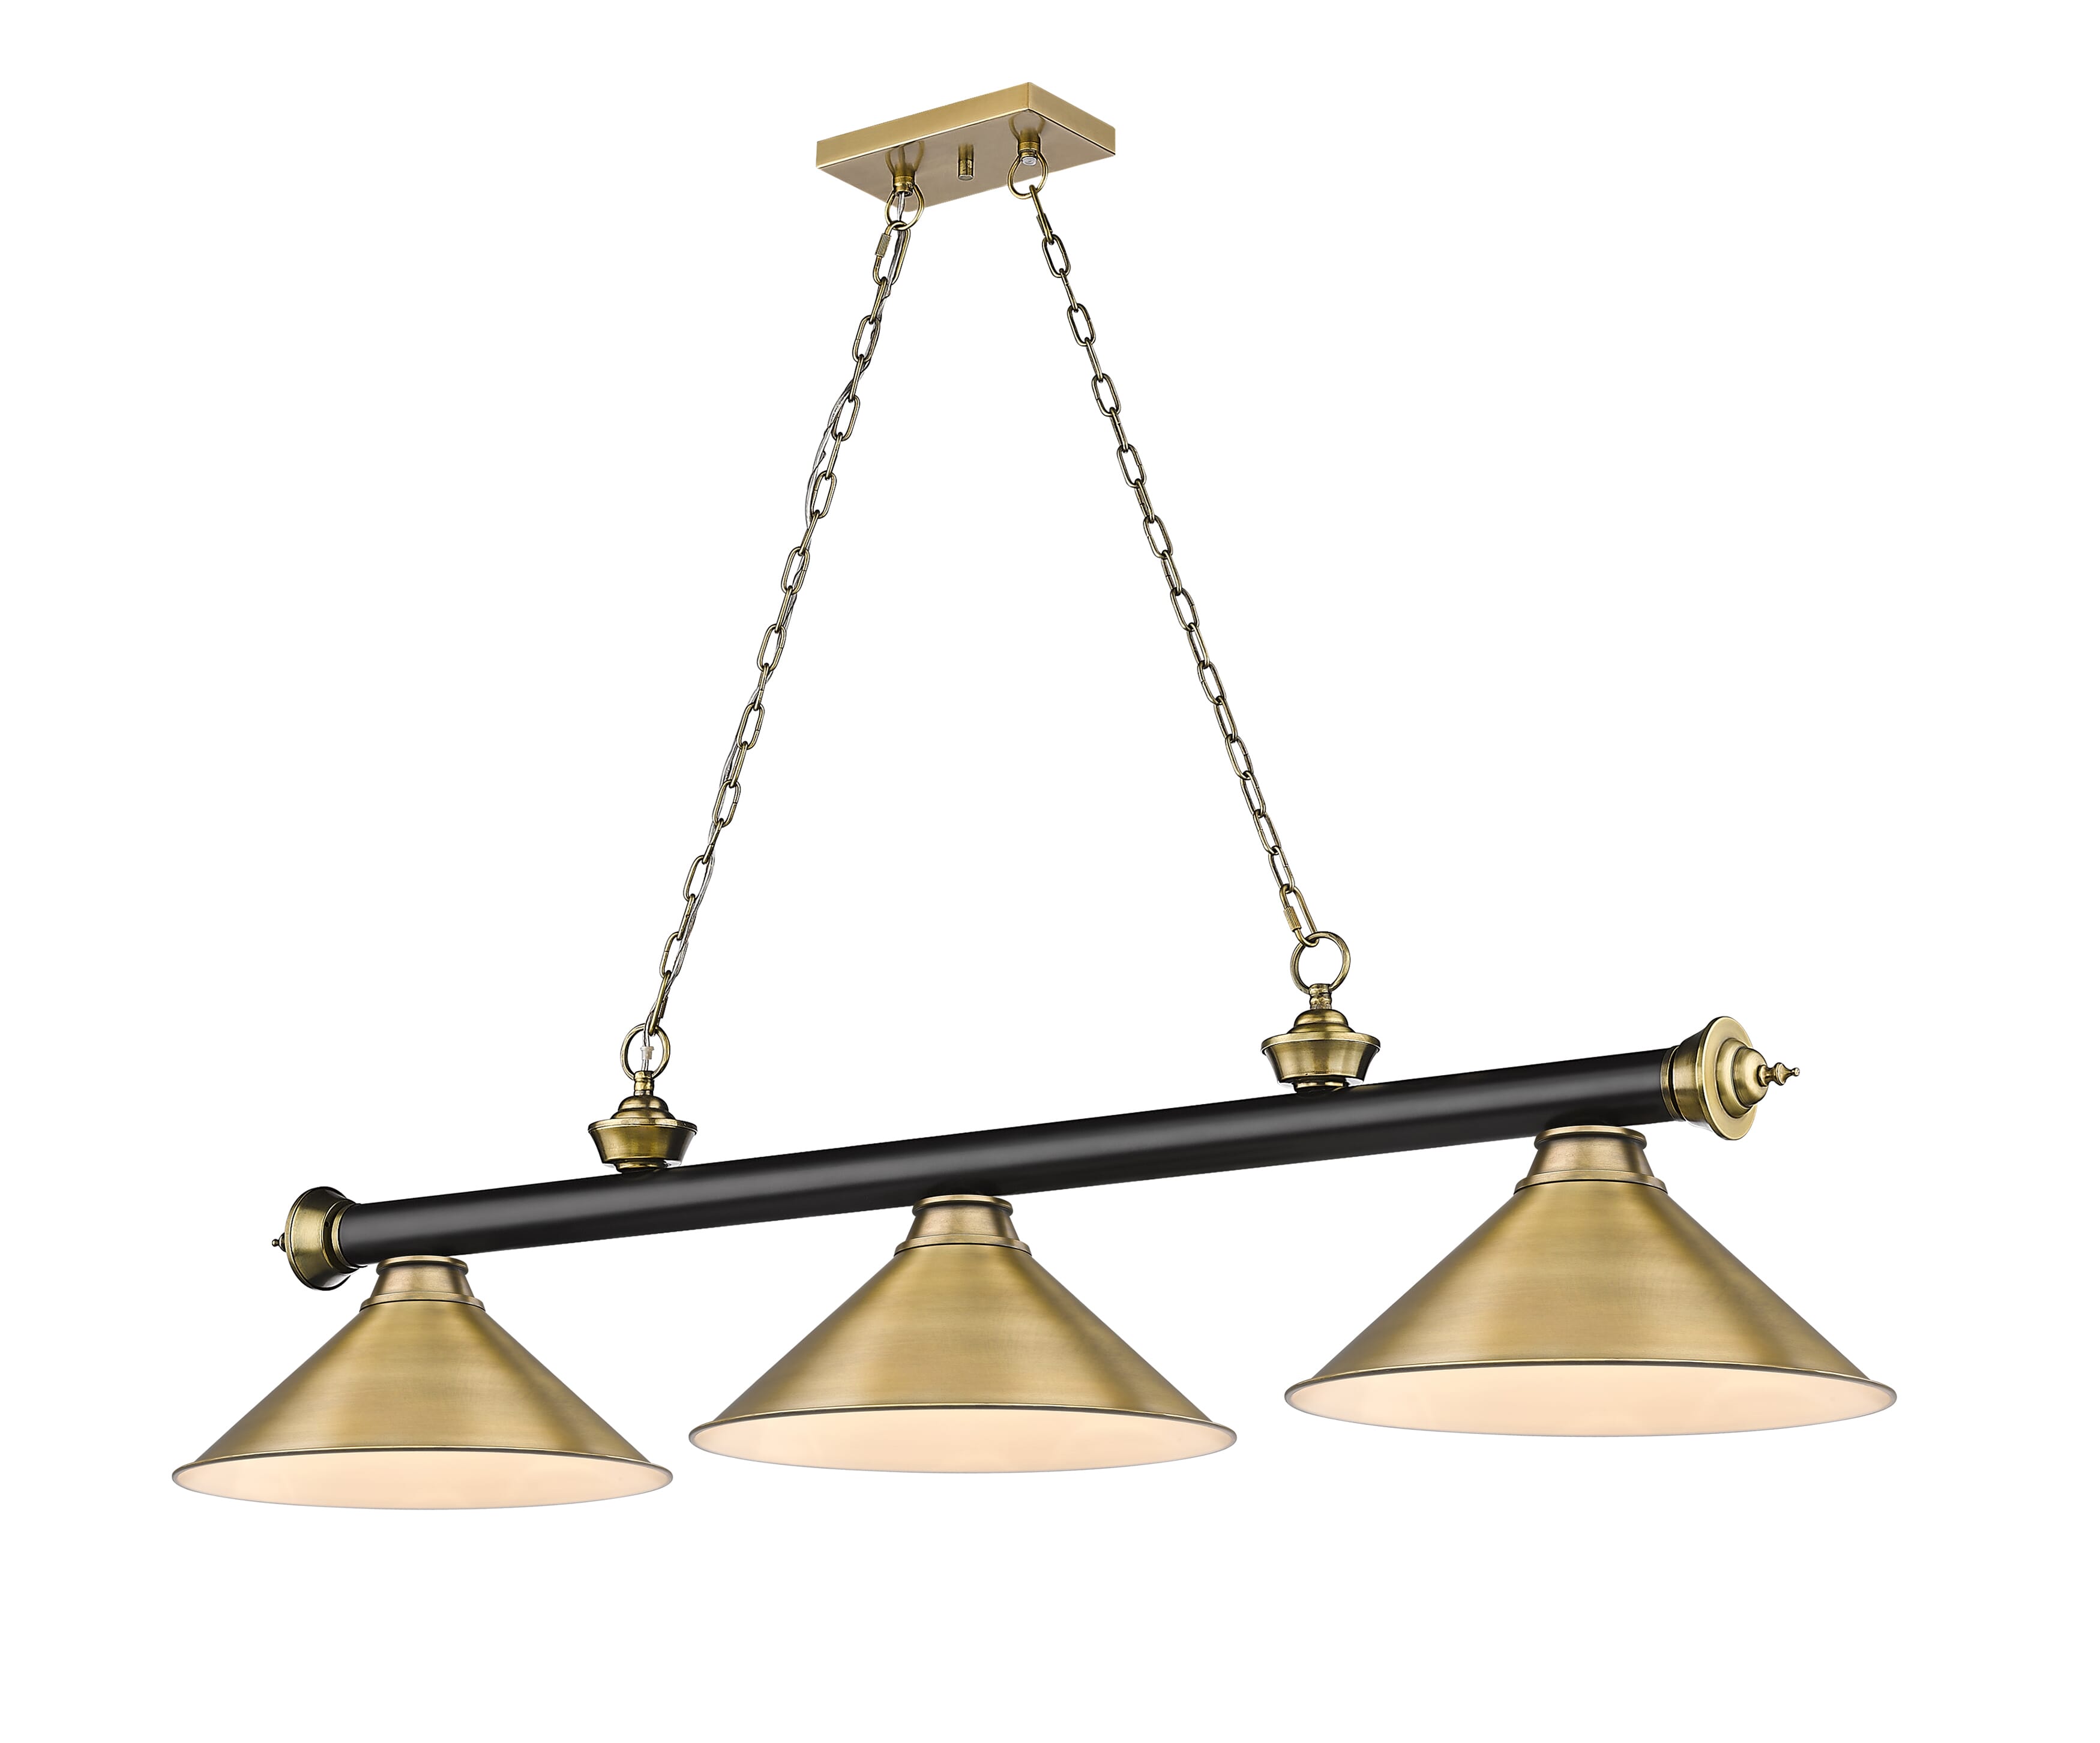 Cordon 3-Light Linear Pendant Light In Matte Black With Rubbed Brass -  Z-Lite, 2306-3MB-RB-RB15